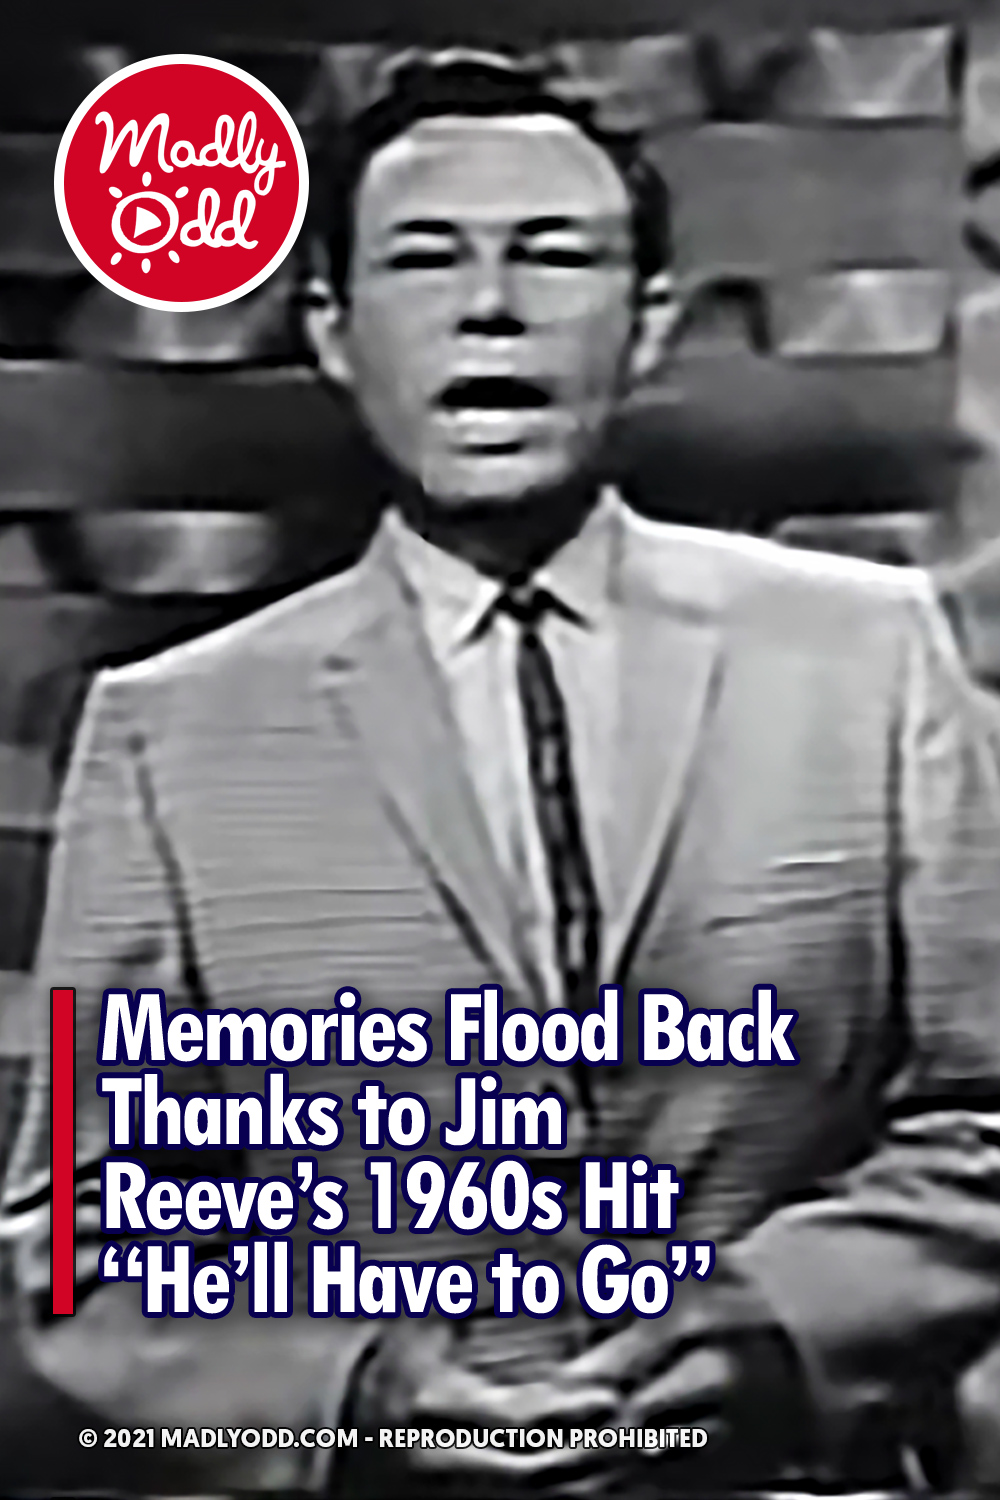 Memories Flood Back Thanks to Jim Reeve’s 1960s Hit “He’ll Have to Go”